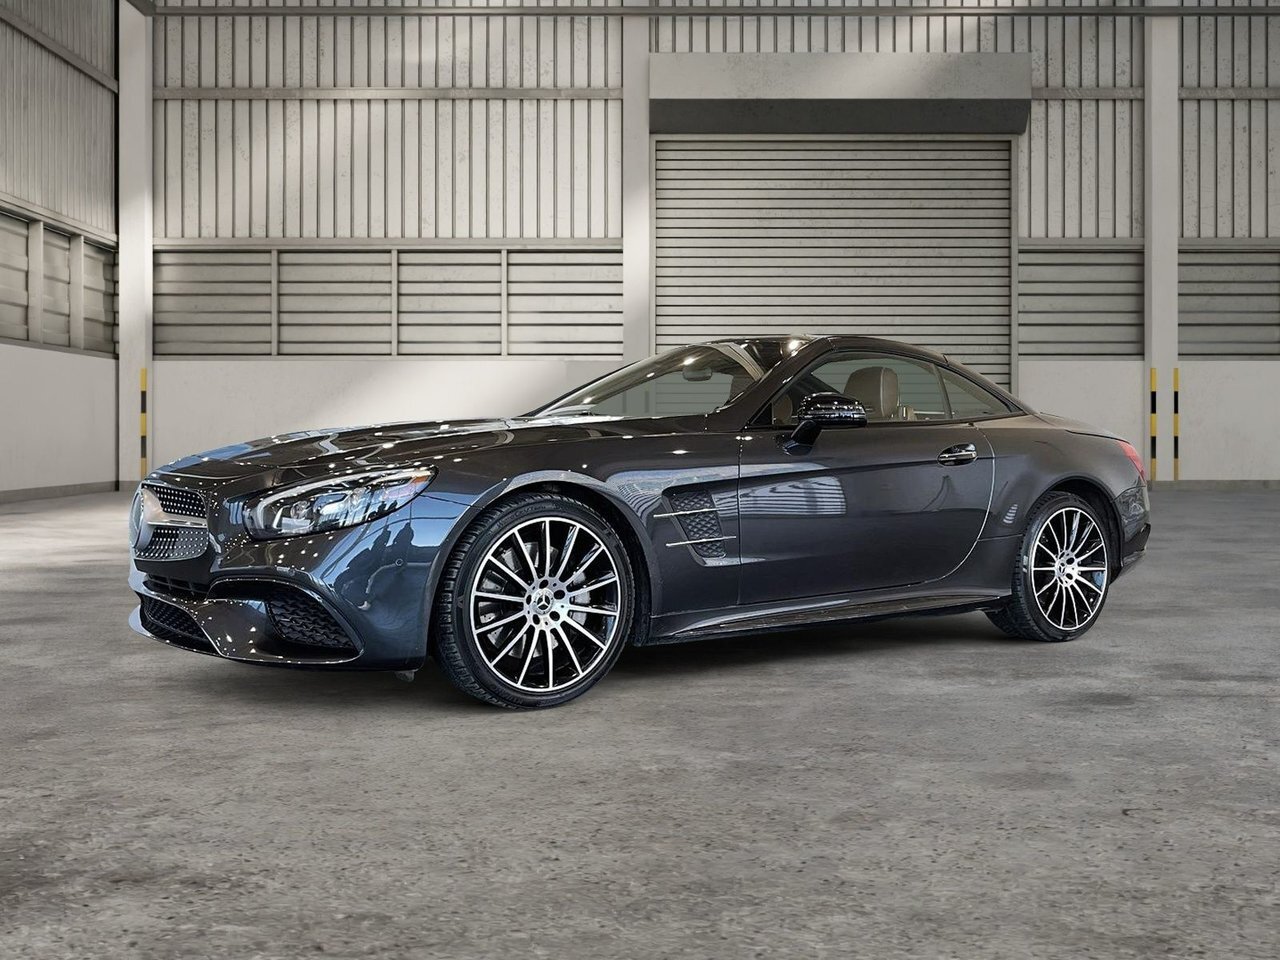 2020 Mercedes-Benz SL450 Roadster Extended warranty! No accidents!